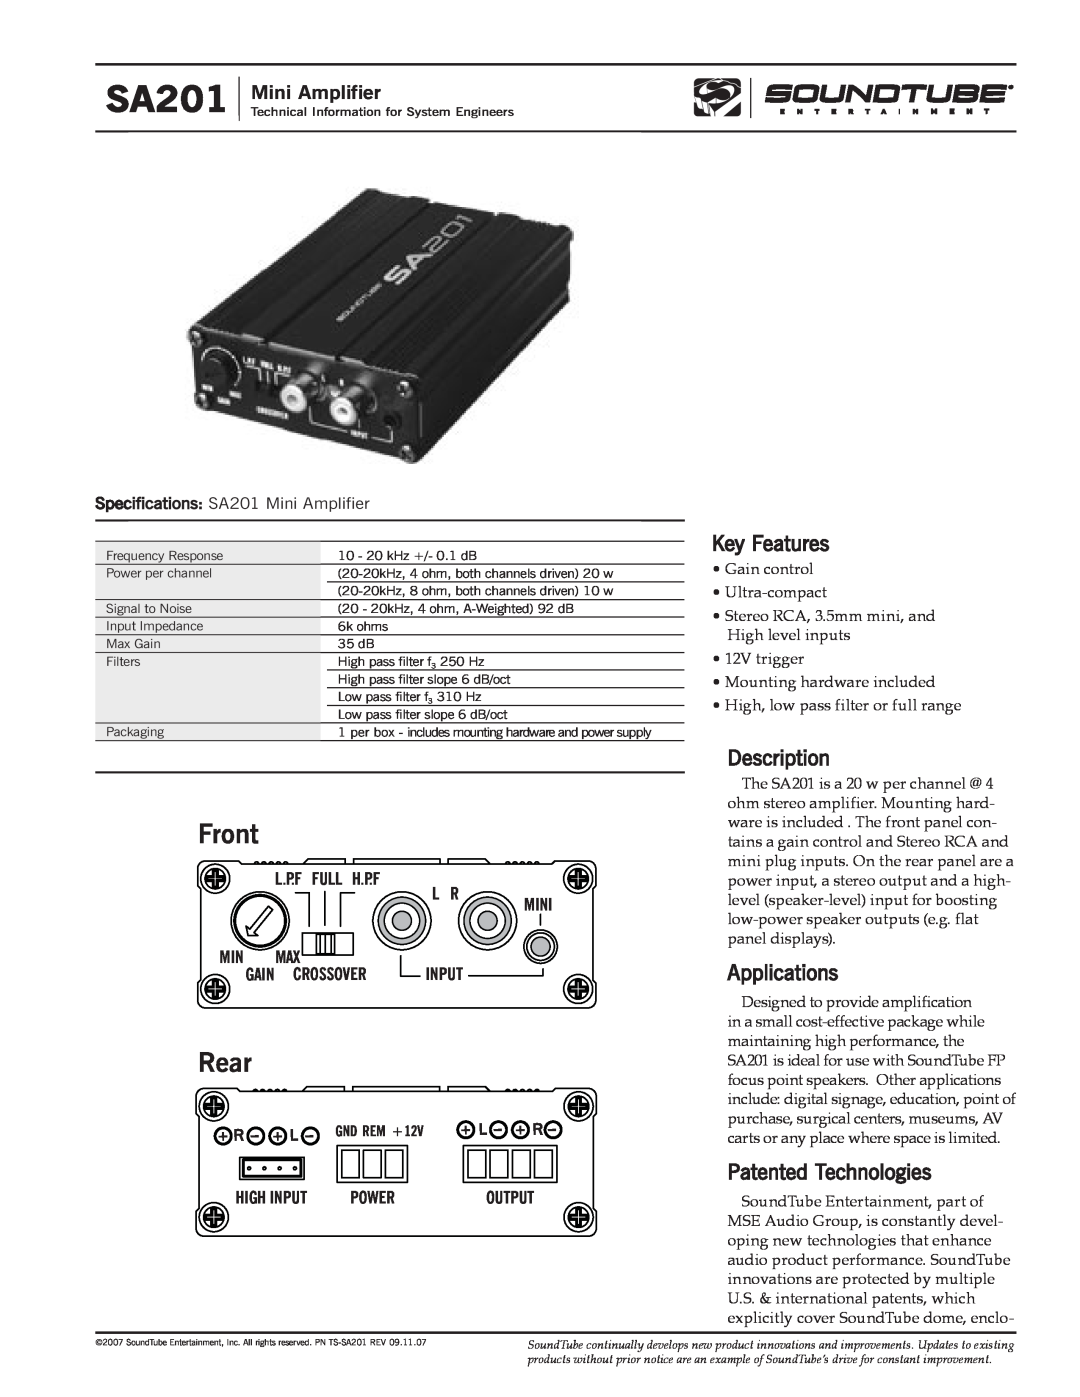 Phase Technology SA201 specifications Key Features, Description, Applications, Patented Technologies, Mini Amplifier, Rear 